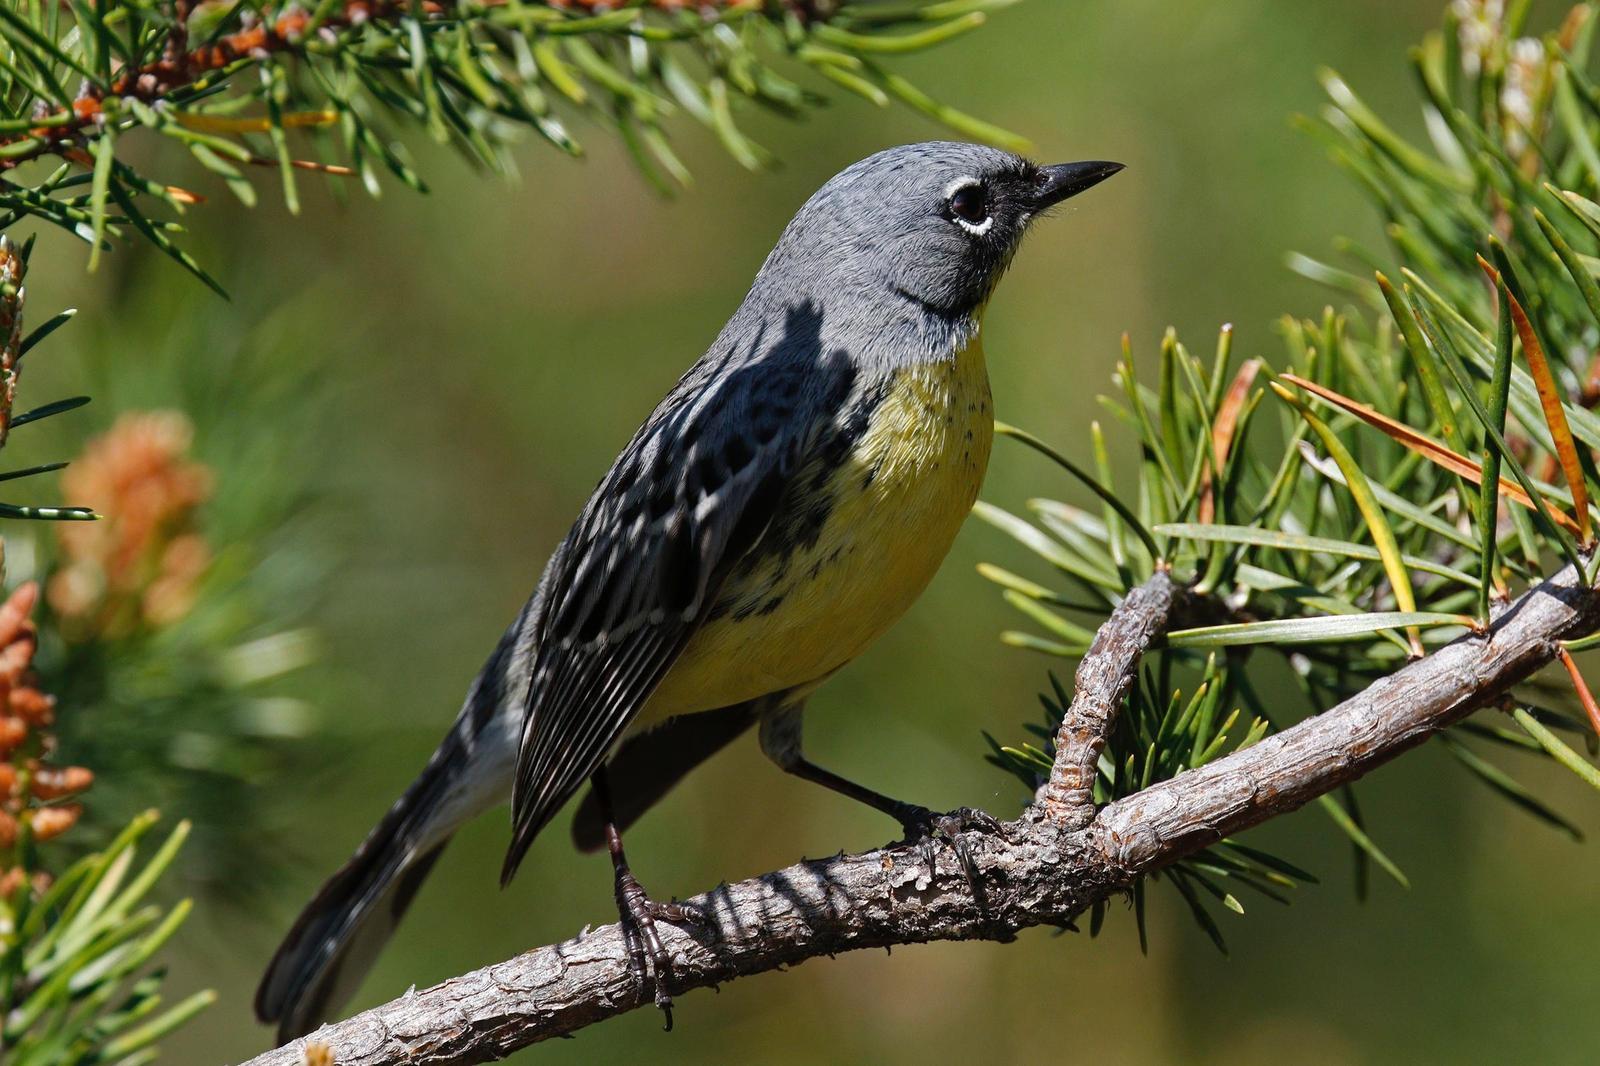 Kirtland's Warbler Photo by Emily Willoughby